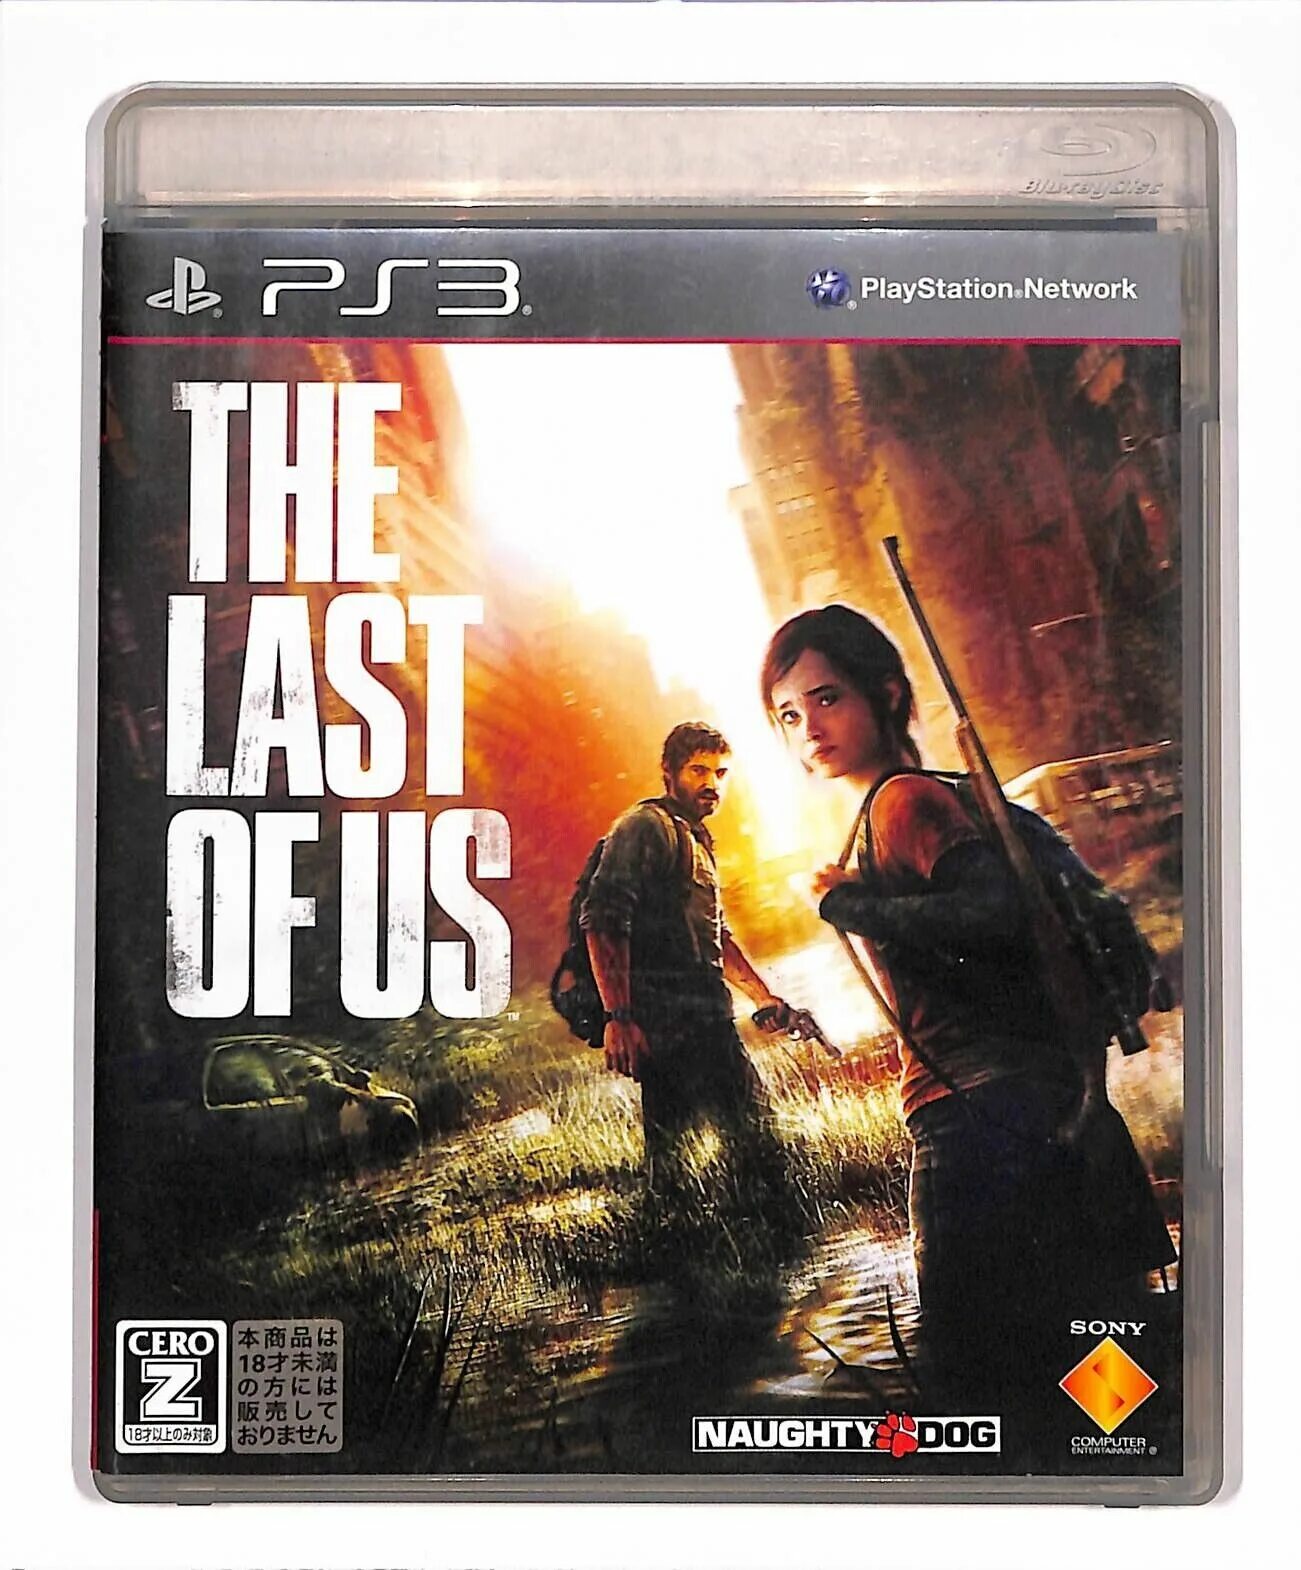 The last of us обложка ps3. The last of us 1 диск на ПС 3. The last of us 2013 обложка. The last of us на пс3. Зе ласт оф пс